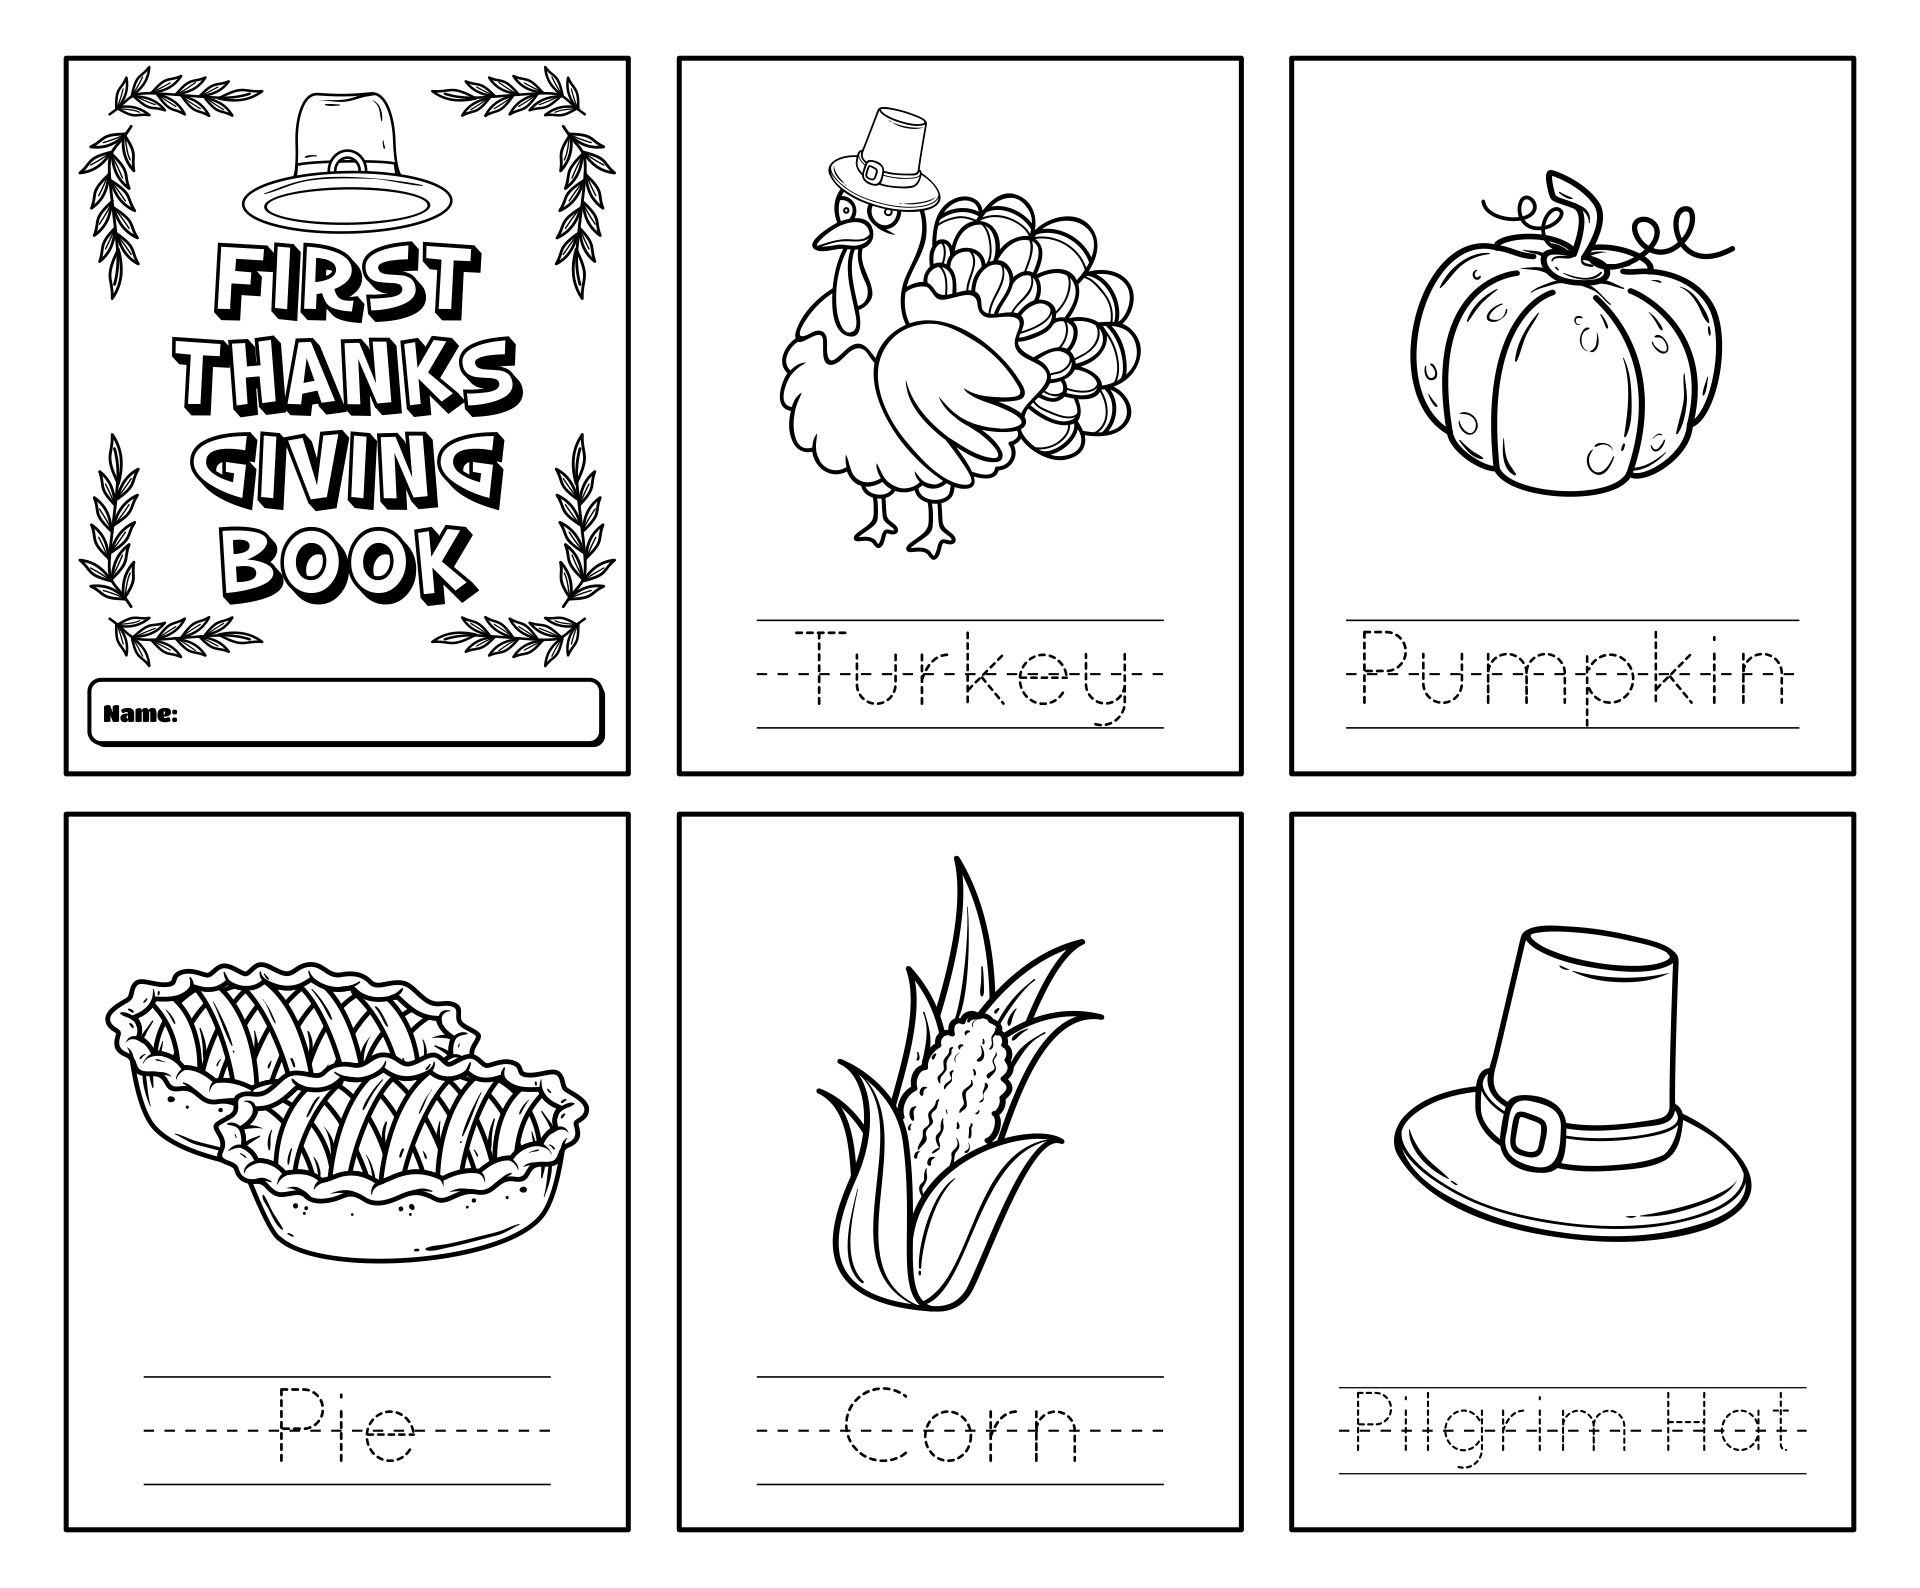 The First Thanksgiving Book Printable